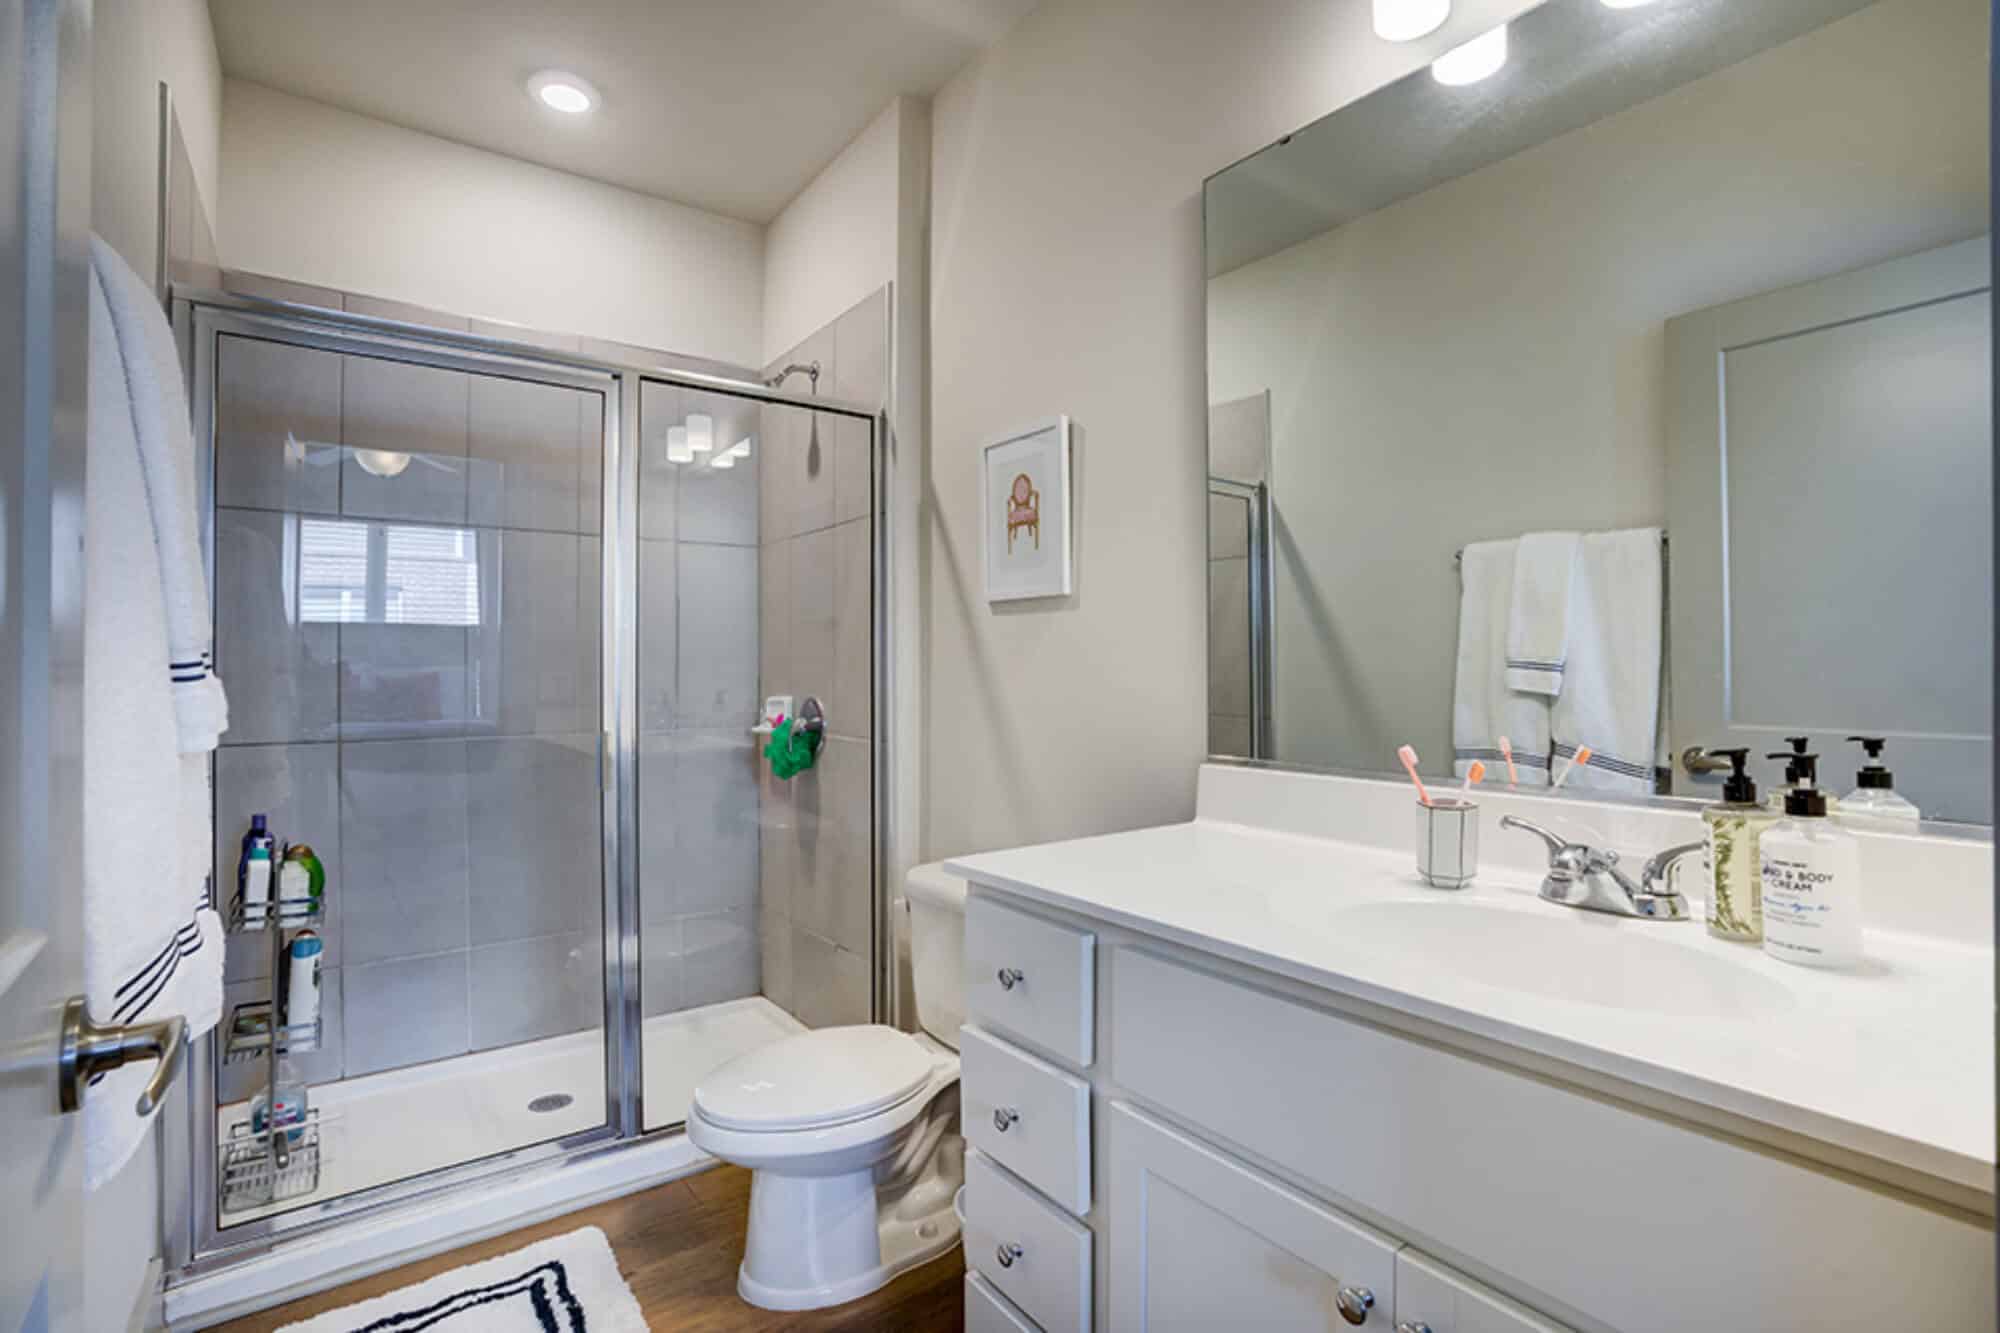 centennial luxury off campus apartments near north carolina state university private bathrooms